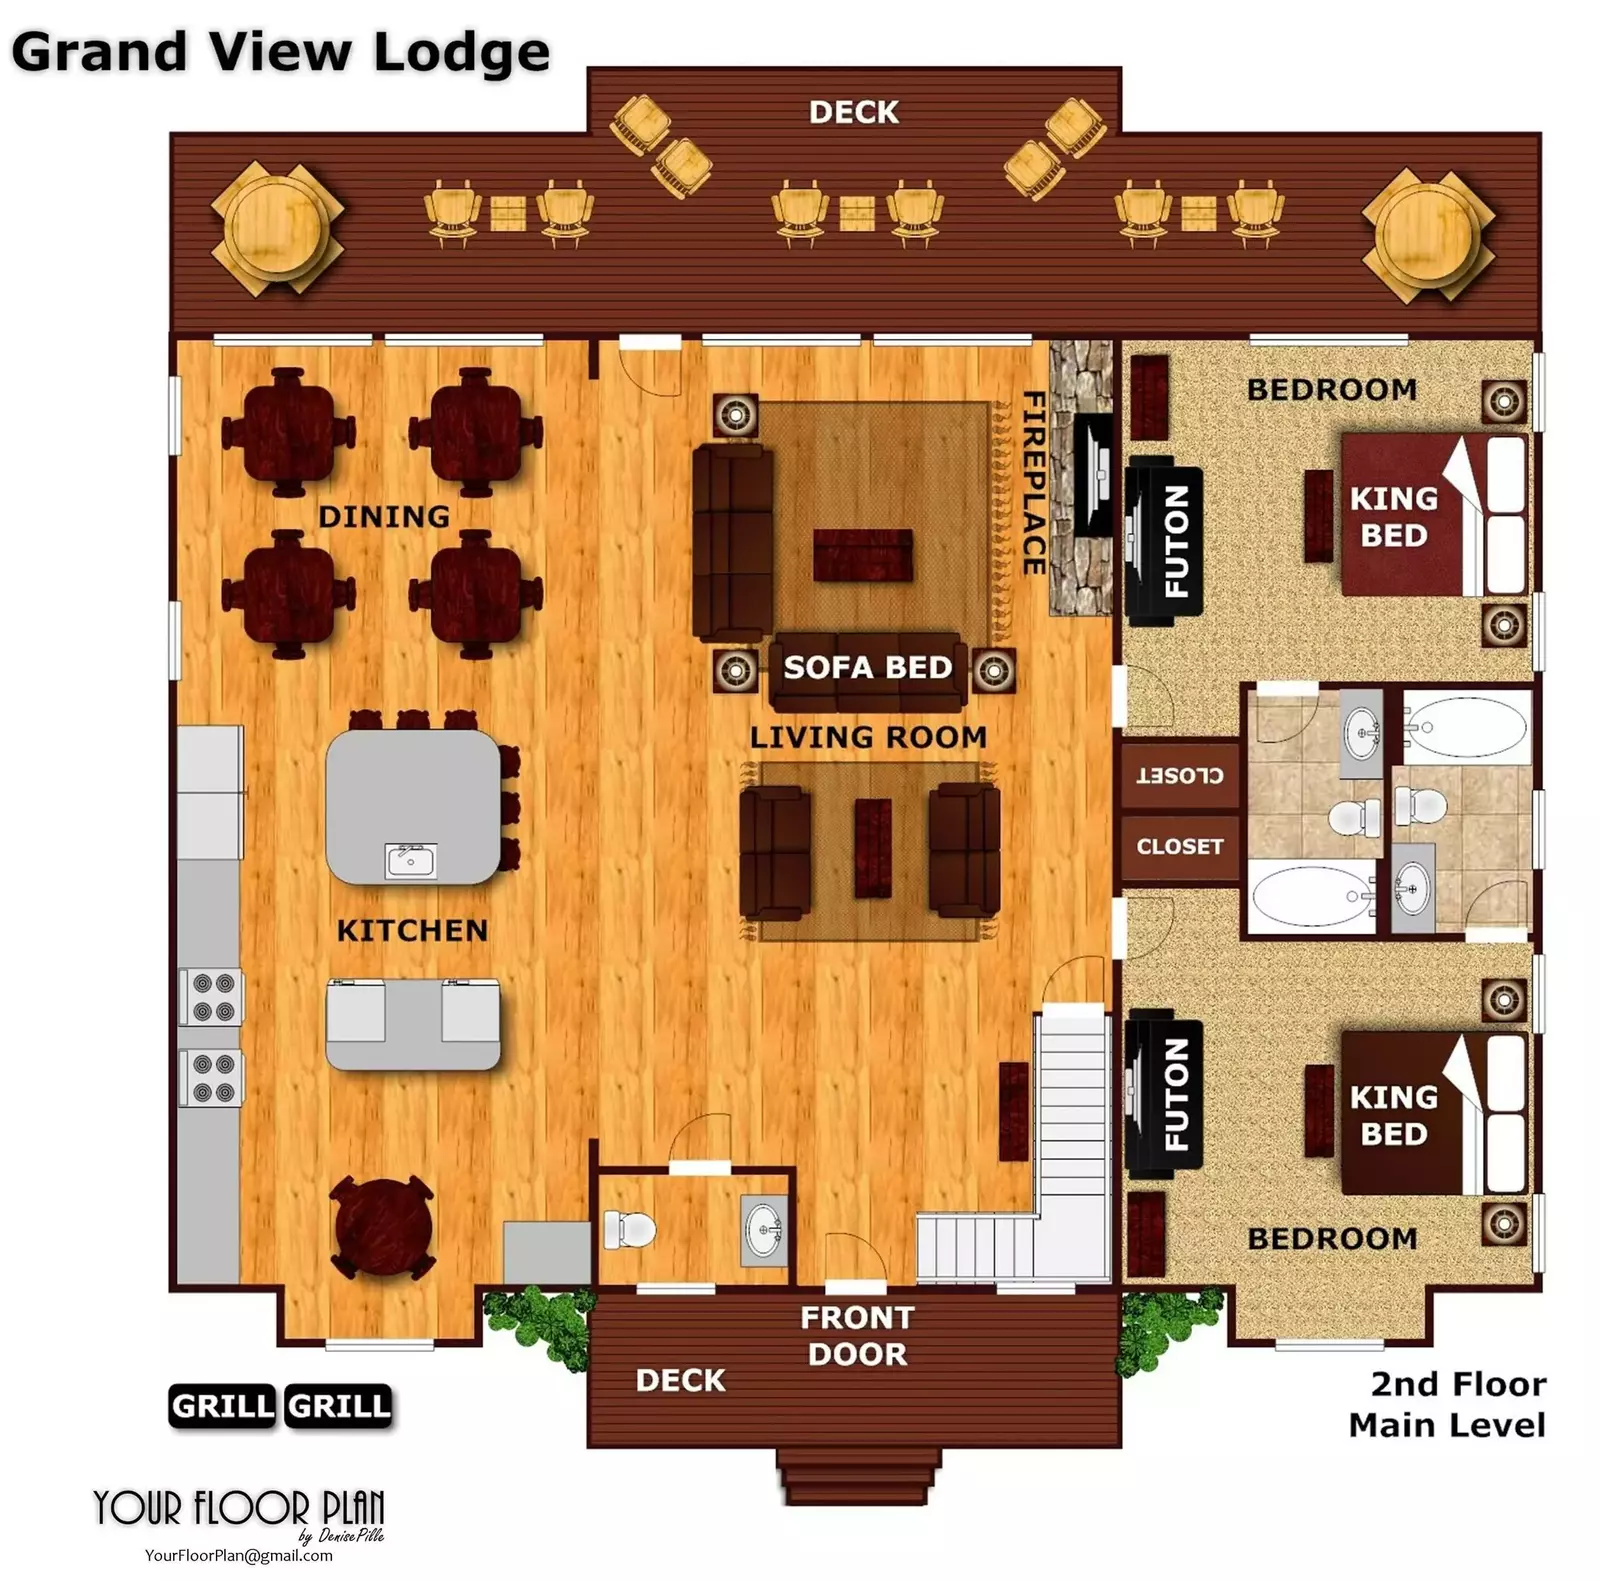 Floor plan of the first floor of Grand View Lodge cabin in Pigeon Forge